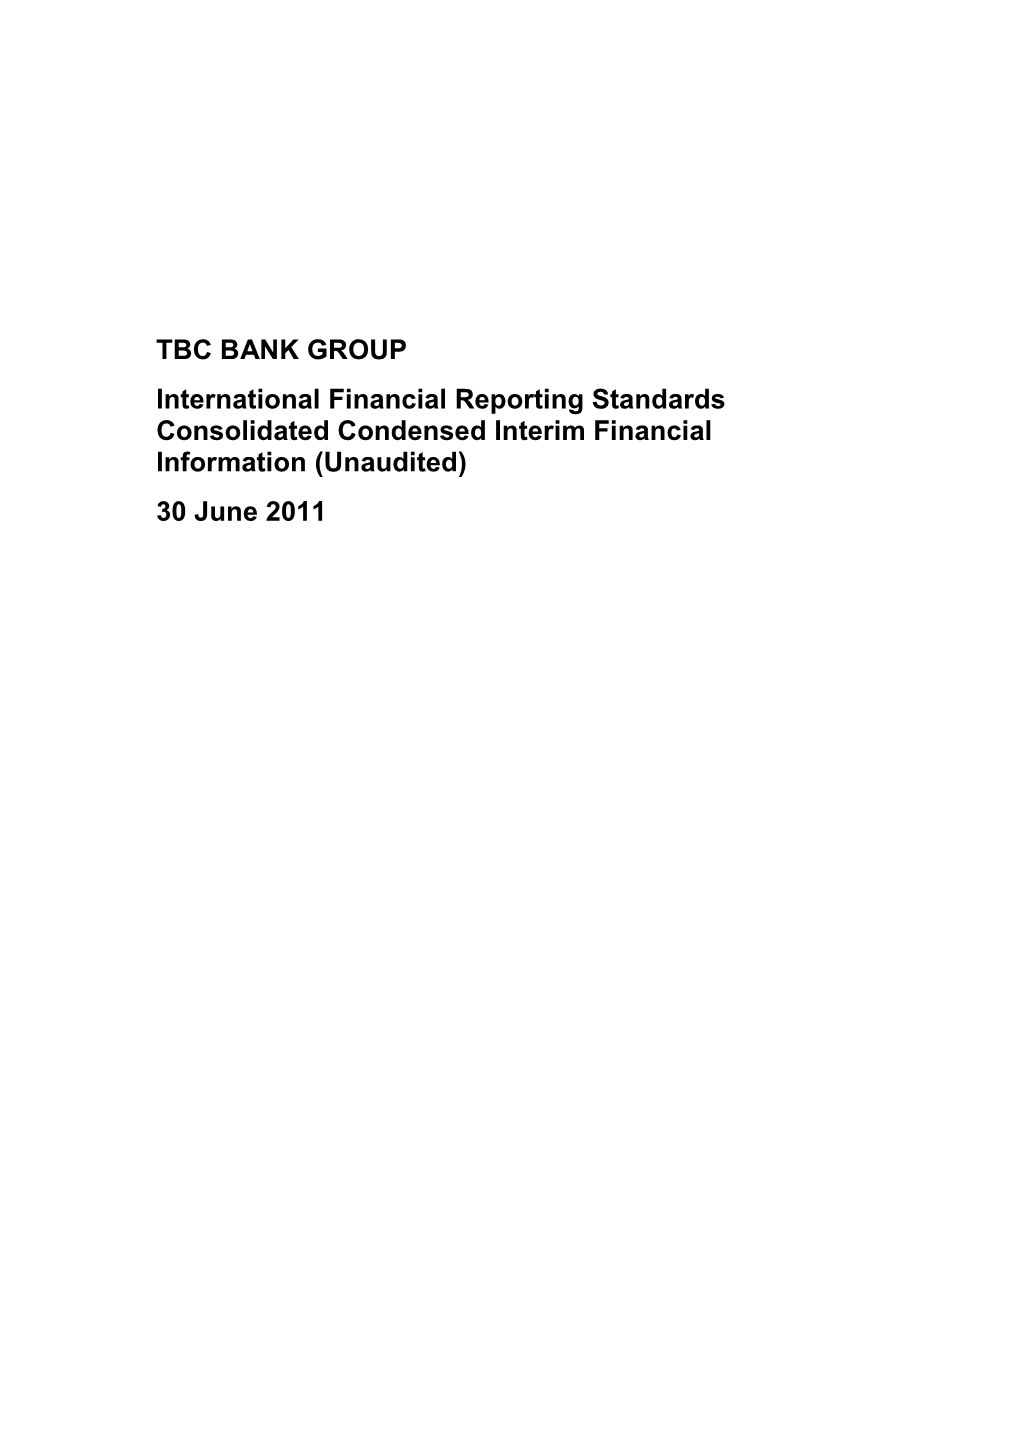 TBC BANK GROUP International Financial Reporting Standards Consolidated Condensed Interim Financial Information (Unaudited) 30 June 2011 TBC Bank Group